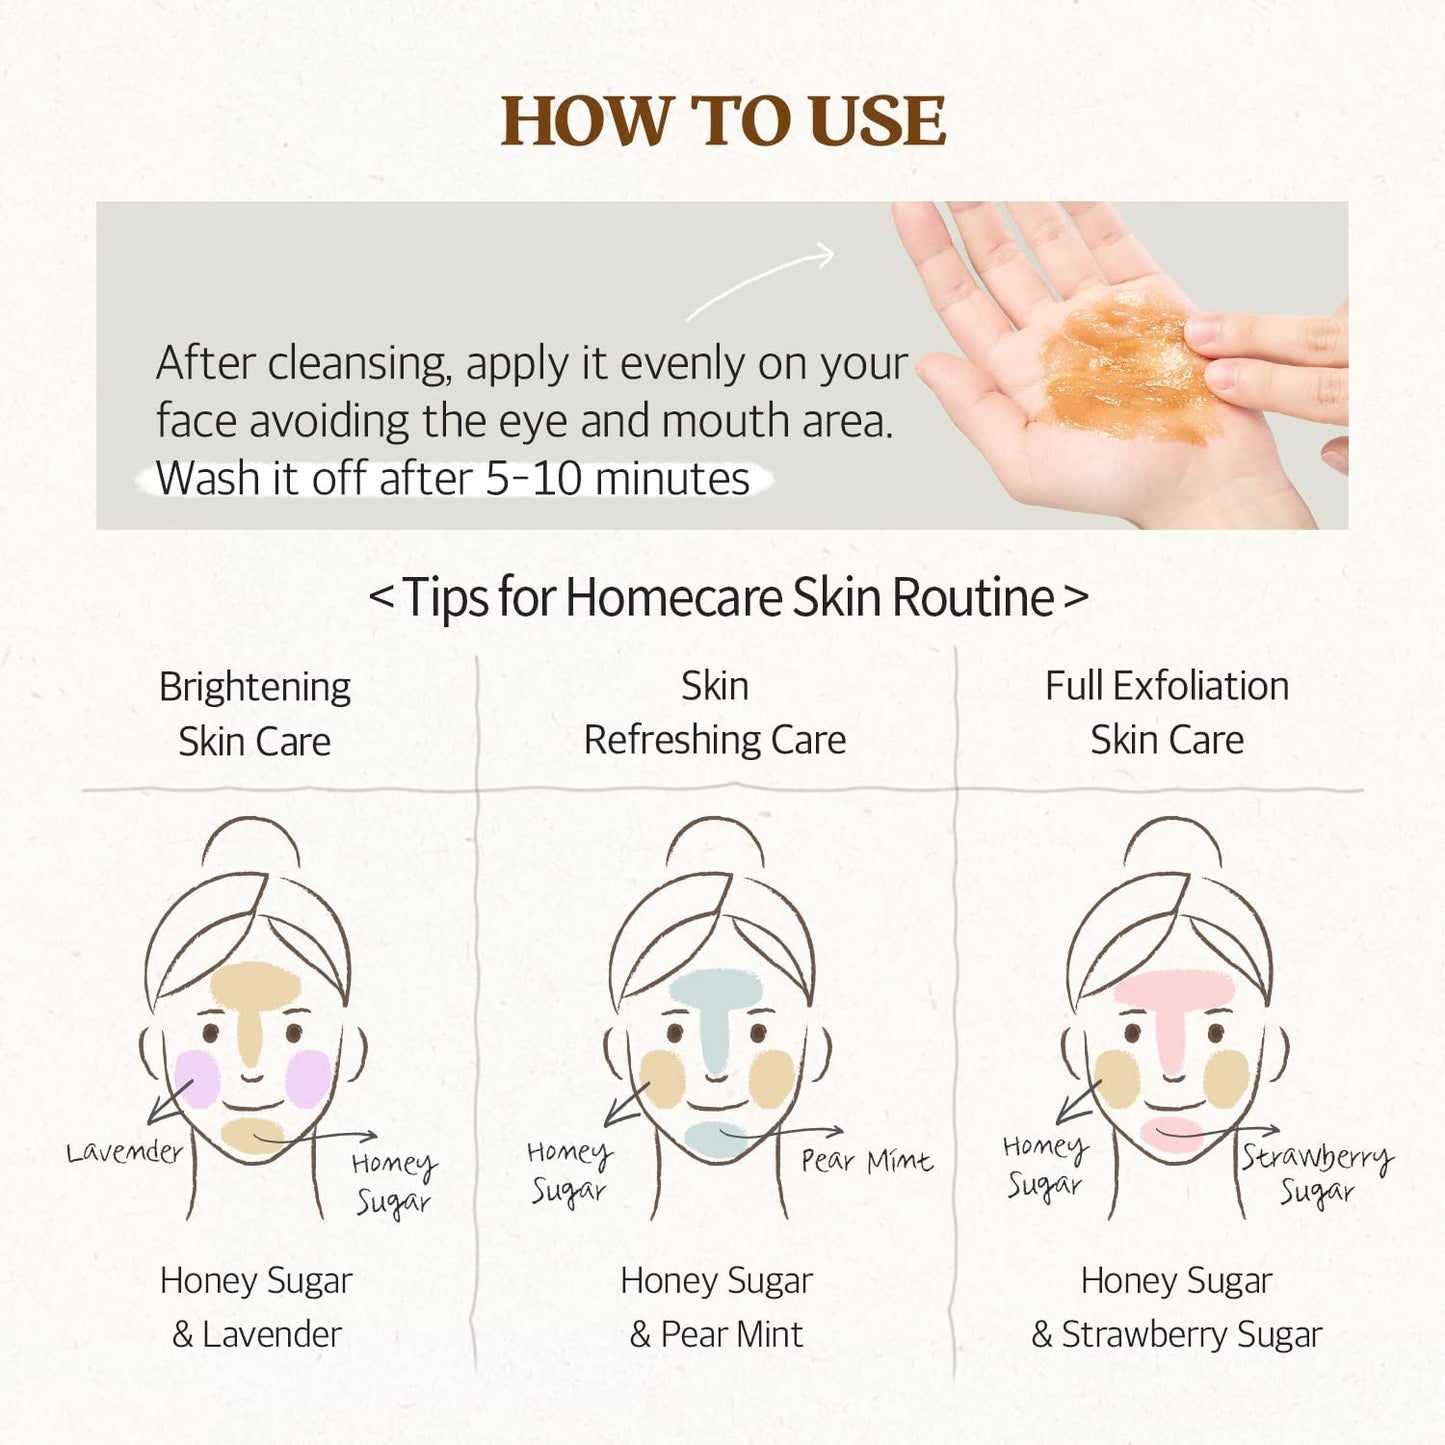 How to use SKINFOOD Honey Sugar Mask: After cleansing apply it evenly on your face avoiding the eye and mouth area. Wash with warm water after 10-15 minutes. Repeat 2-3 times a week. 